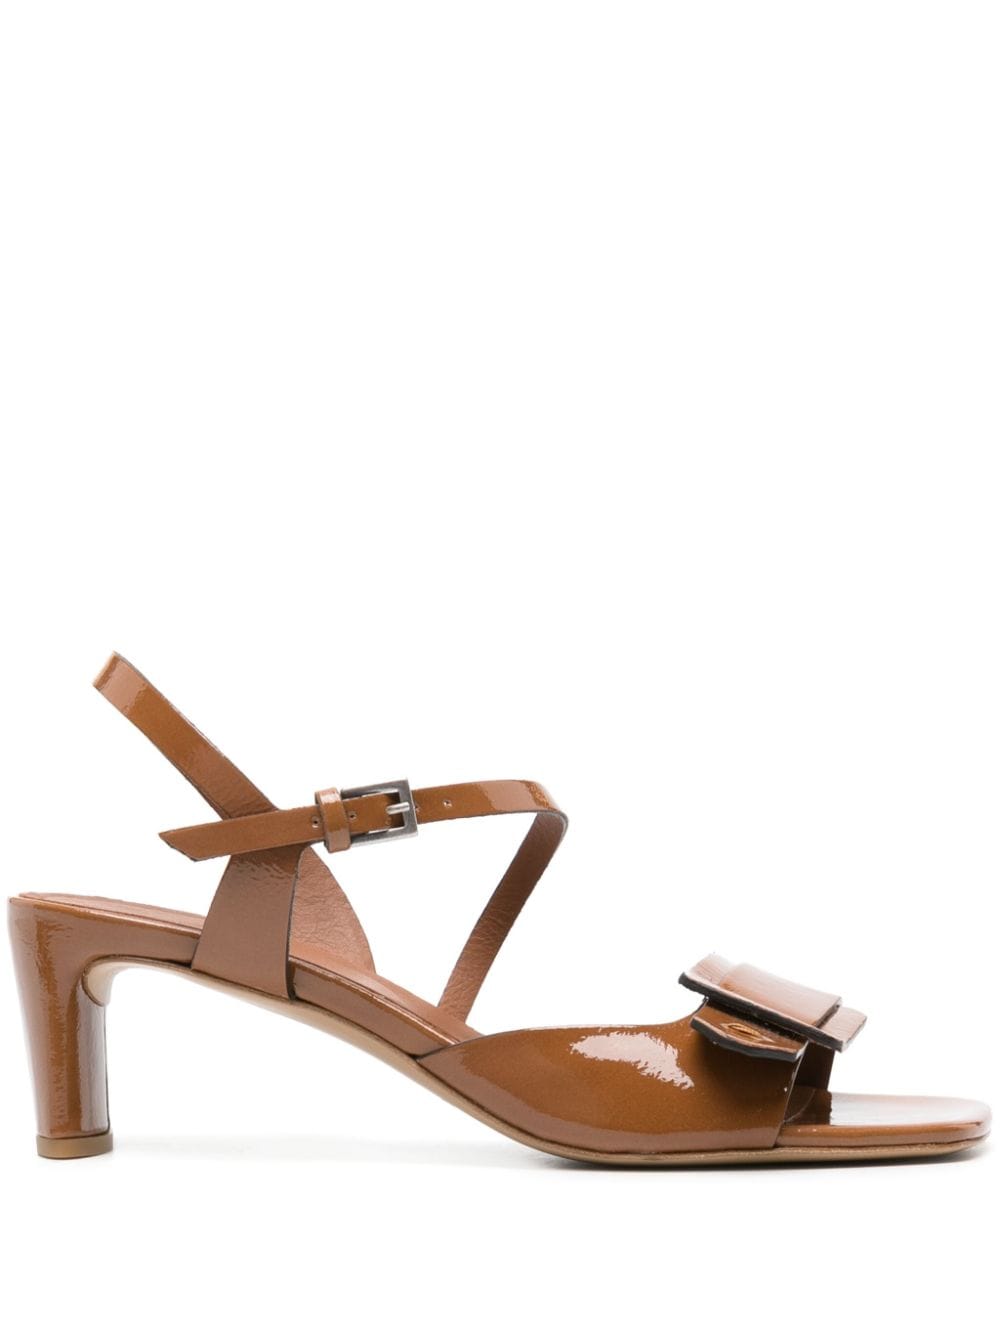 60mm square-toe leather sandals